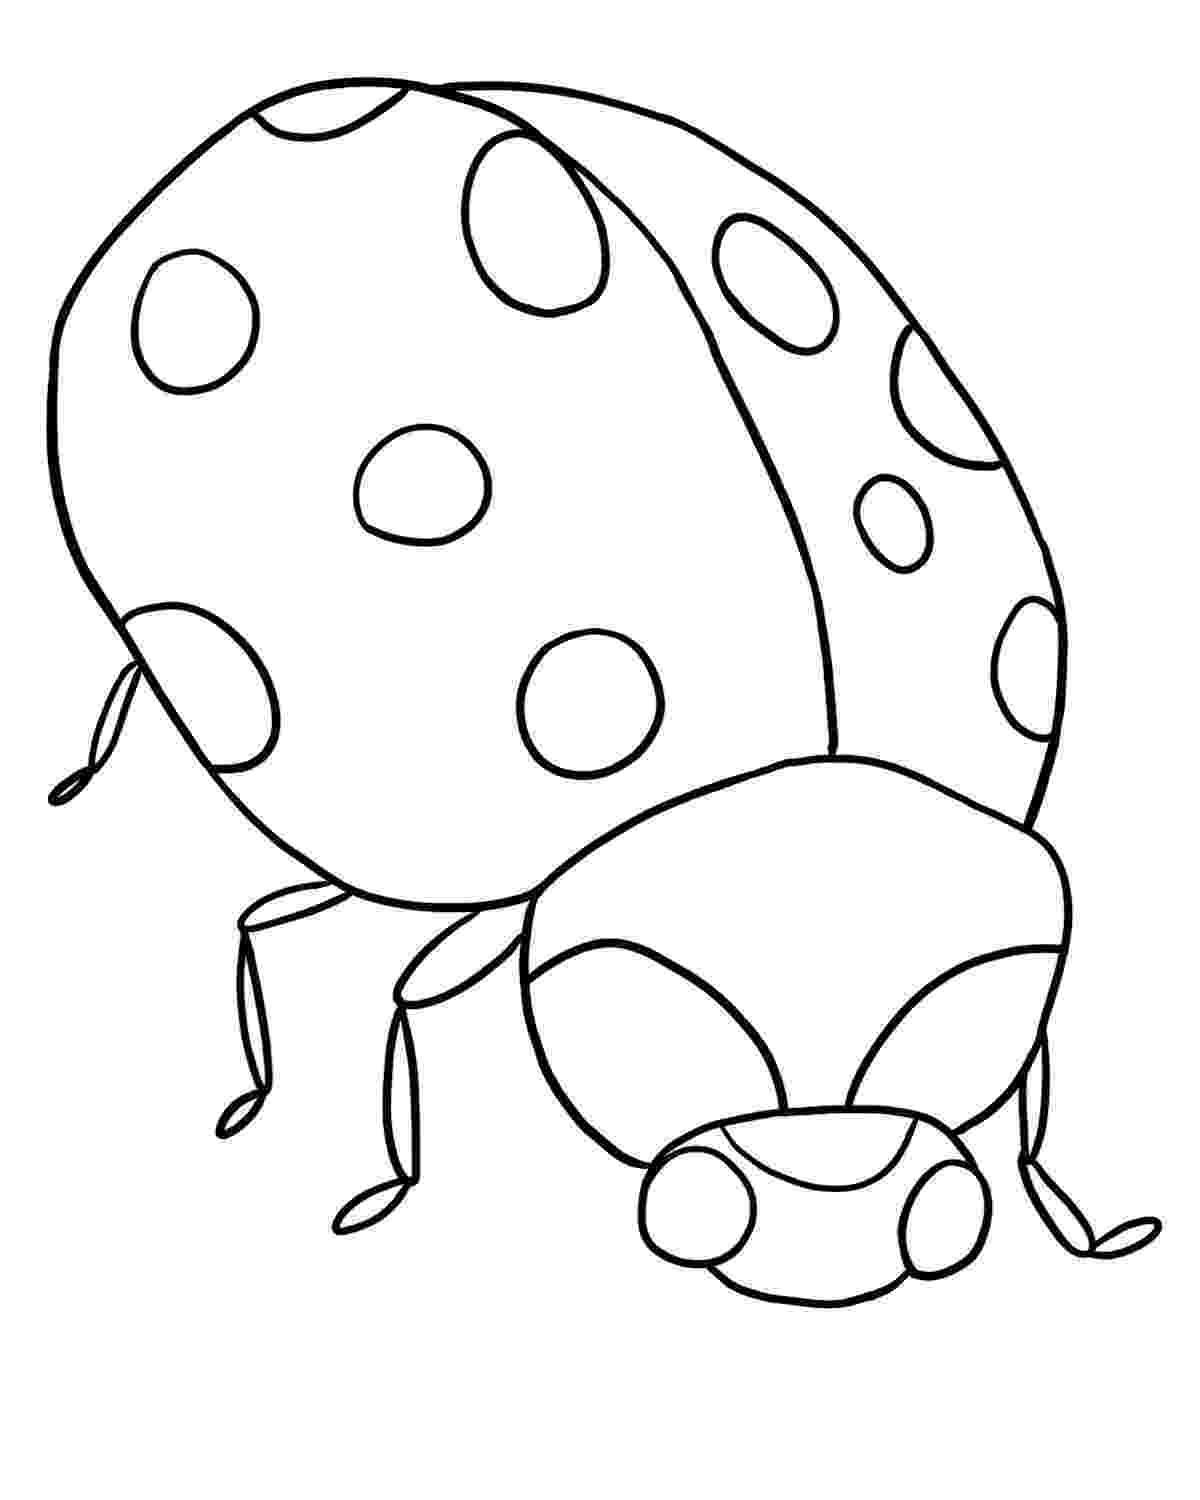 ladybird colouring page ladybug coloring pages to download and print for free page ladybird colouring 